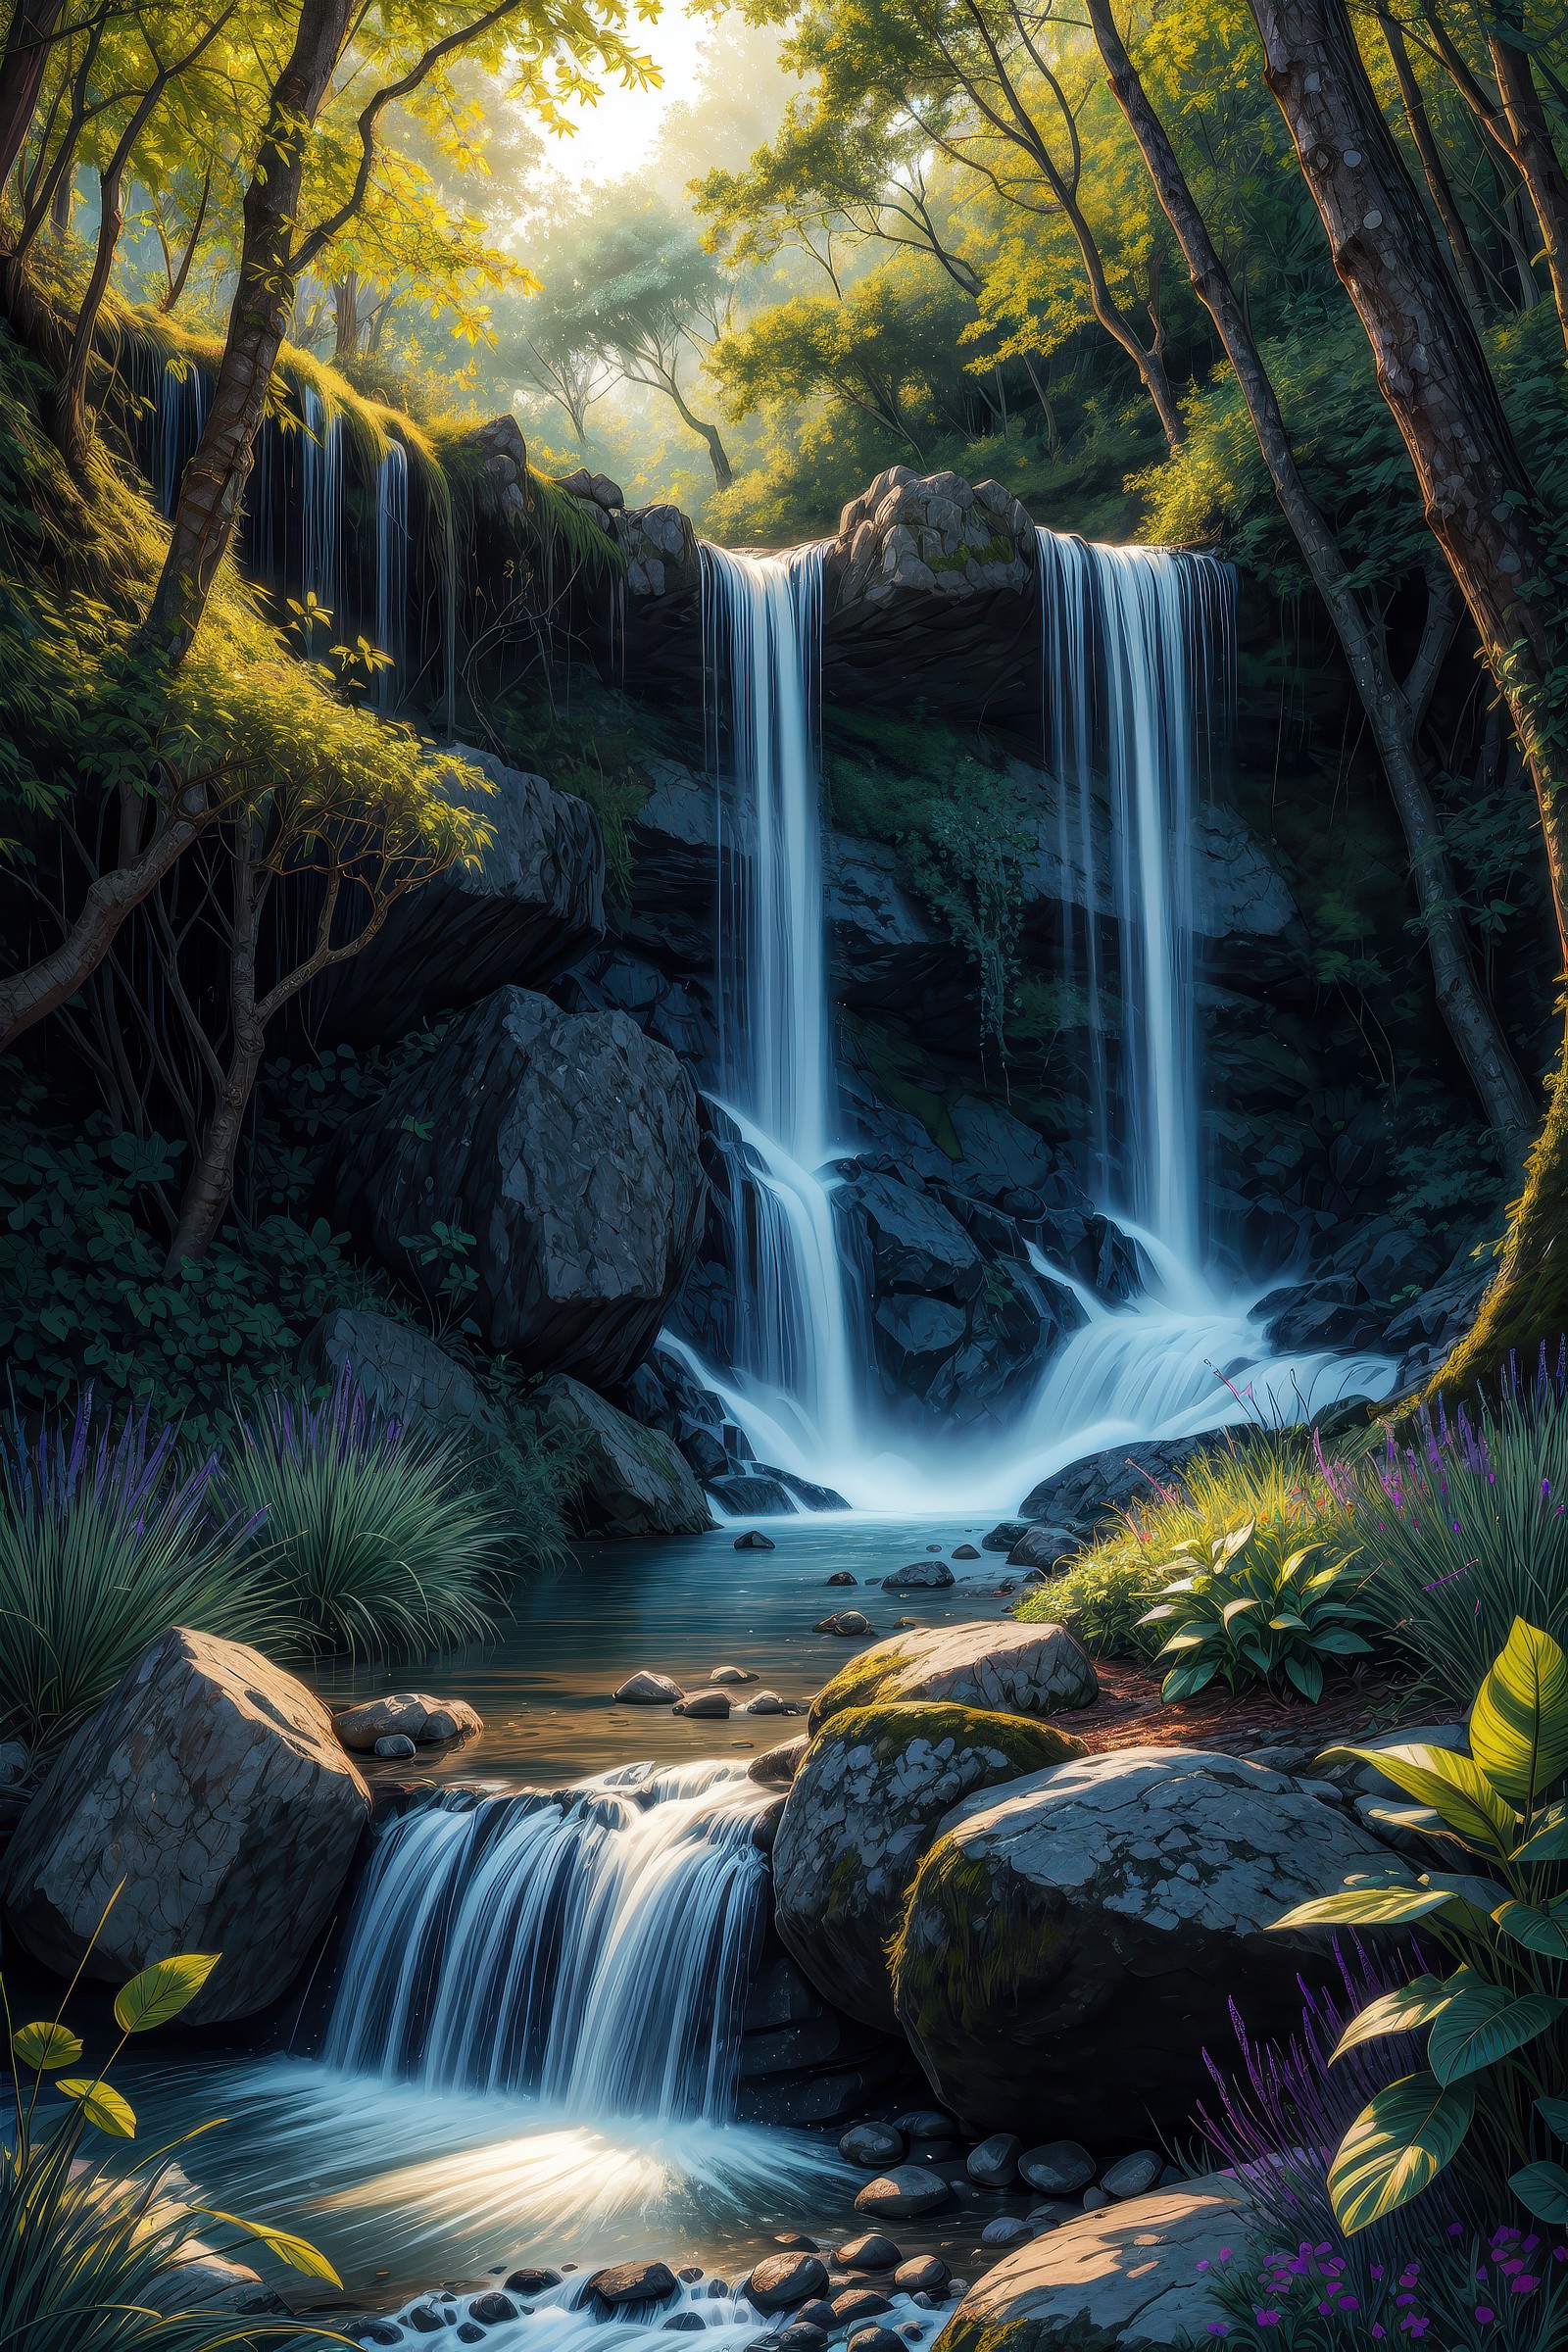 enchanted forest with a hidden waterfall and glowing plants, dream scenery art, landscape, beautiful gorgeous digital art ...